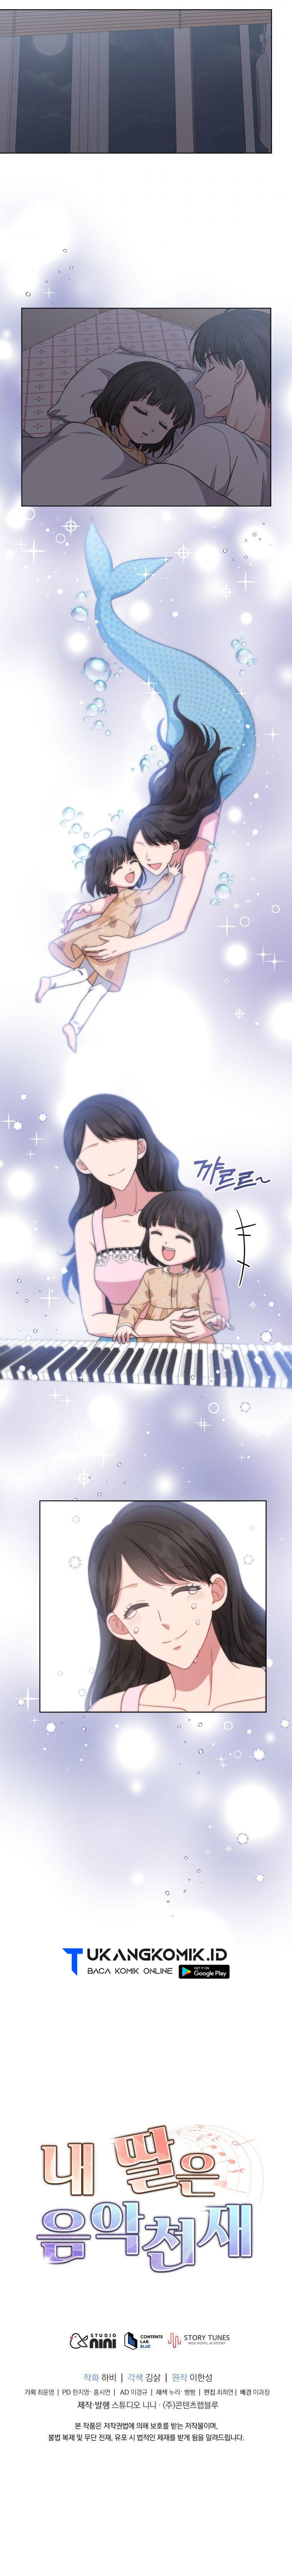 my-daughter-is-music-genius Chapter 46